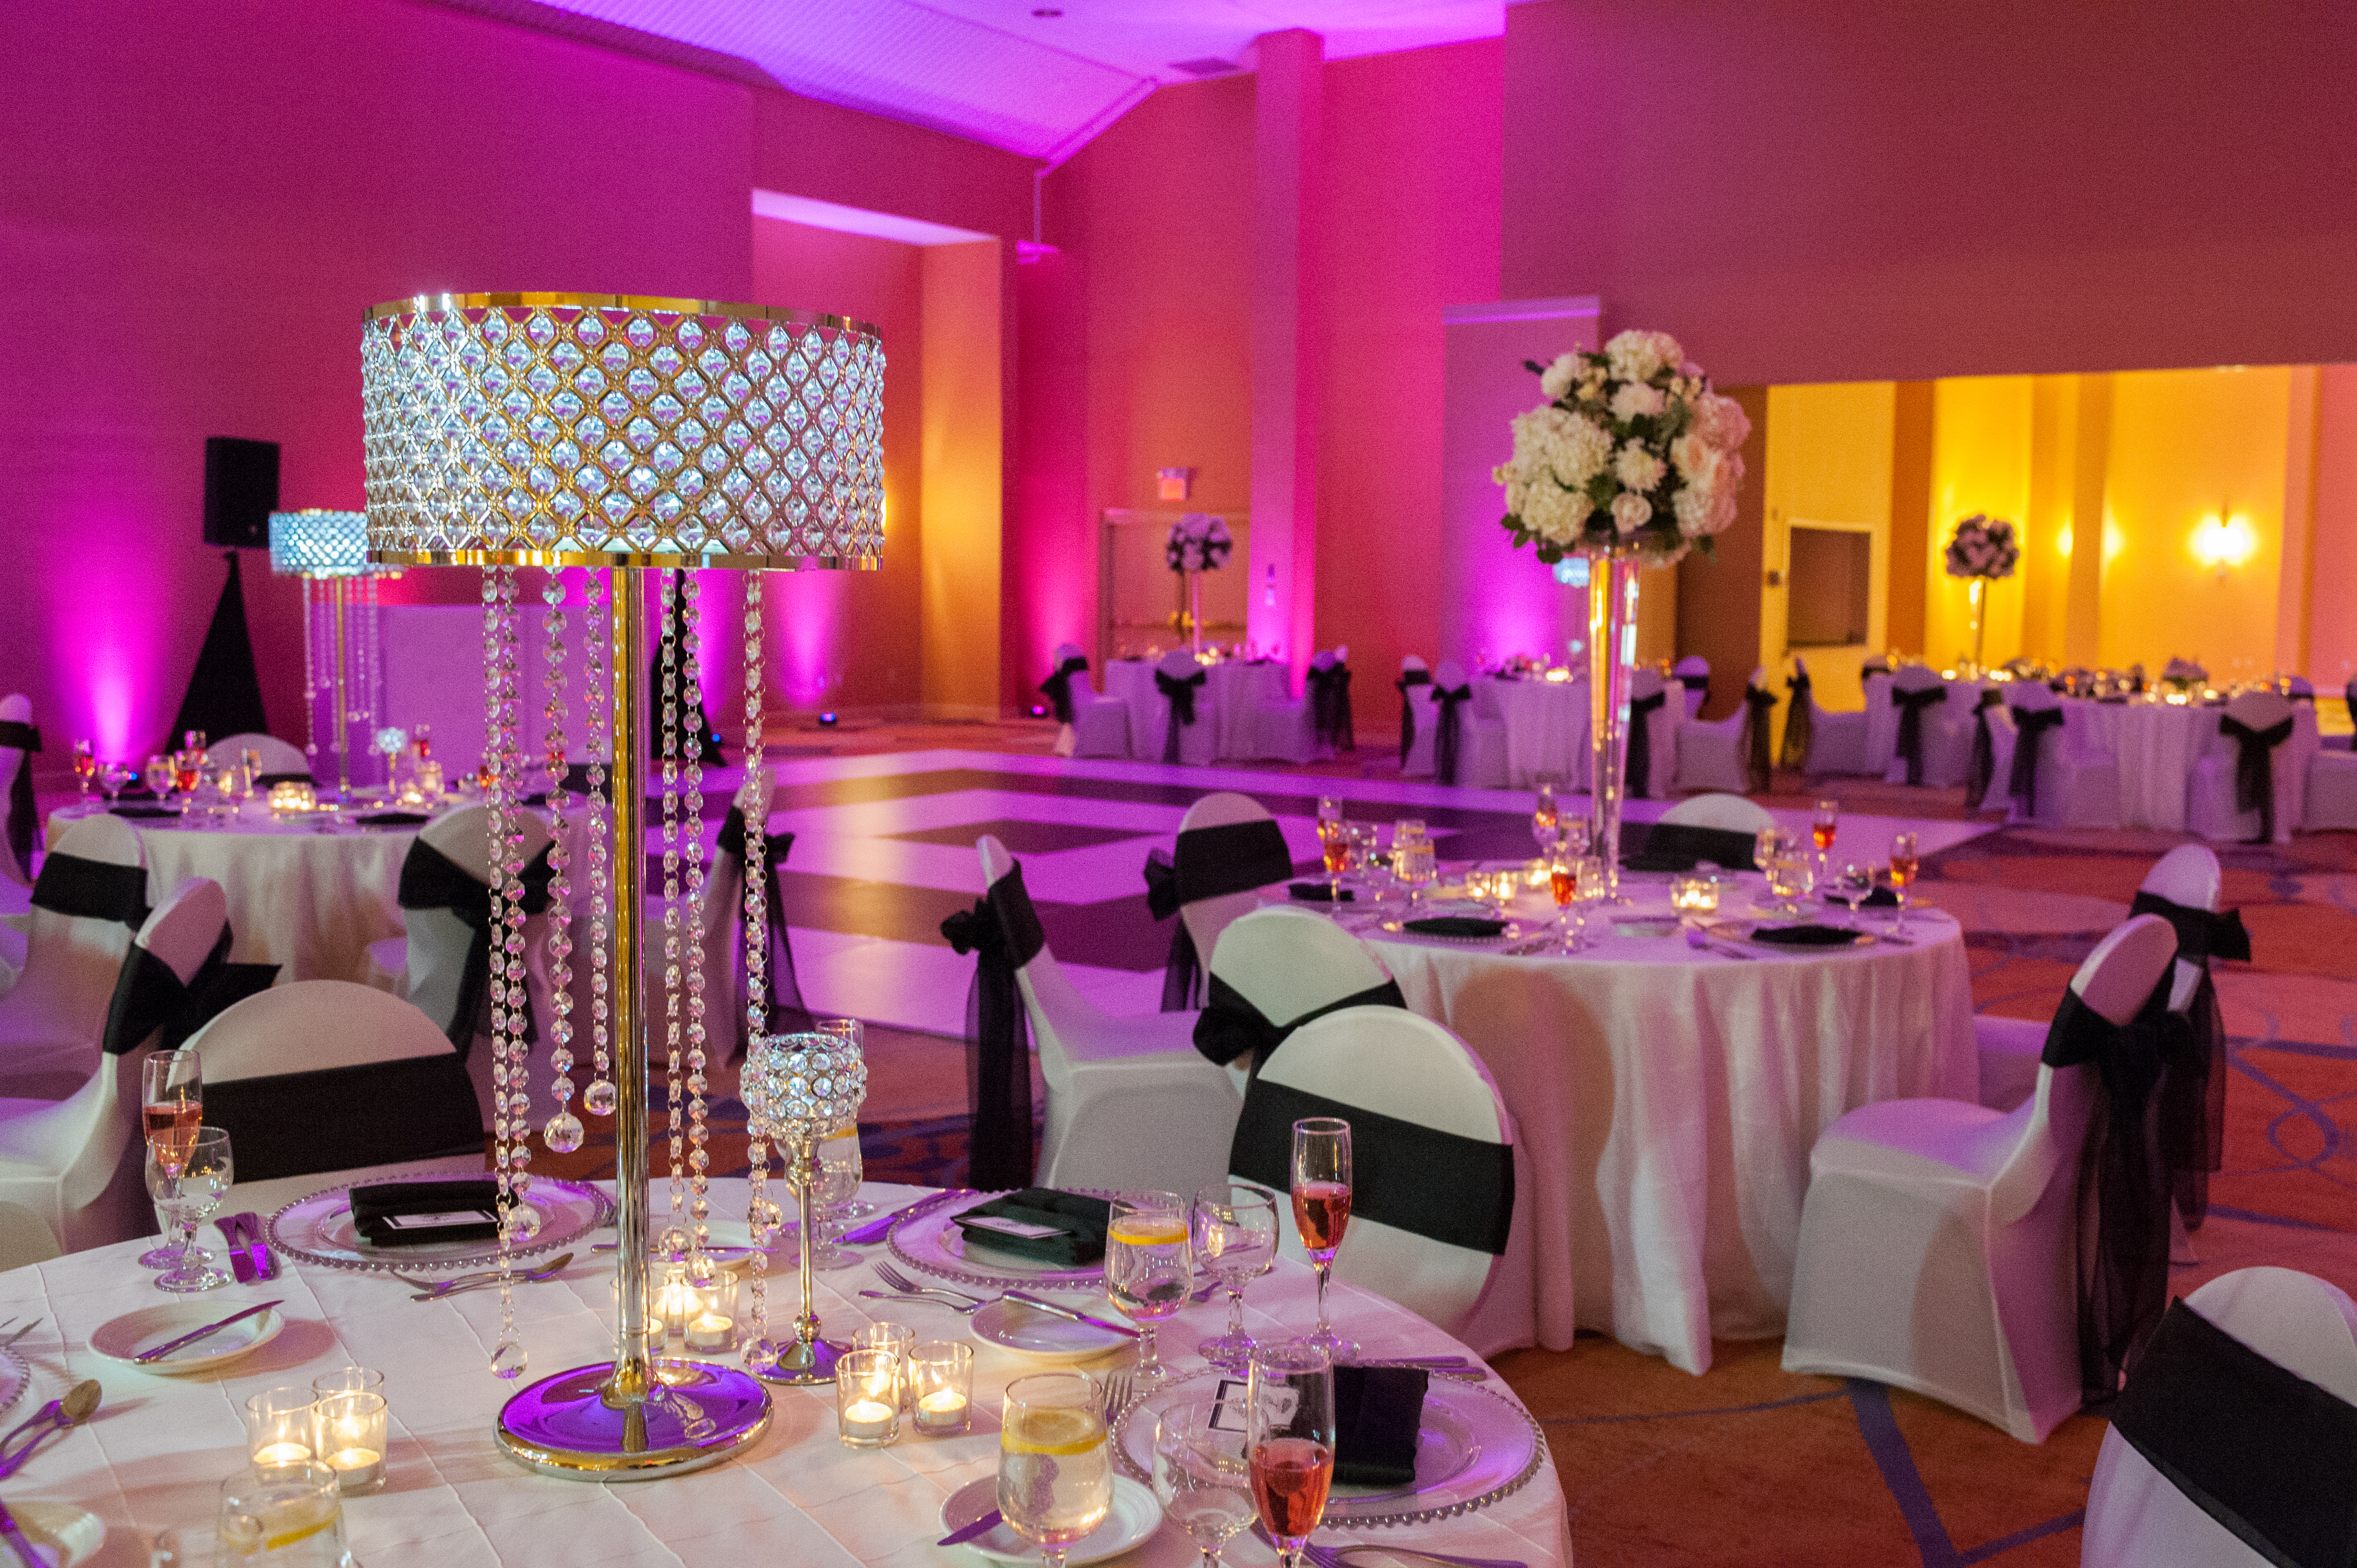  Wedding Reception With Dramatic Pink Lighting, Dance Floor, Chairs With White Covers and Black Sashes, Round Tables With Place Settings, Jeweled Lamps, White Flowers, and Candles on White Linens